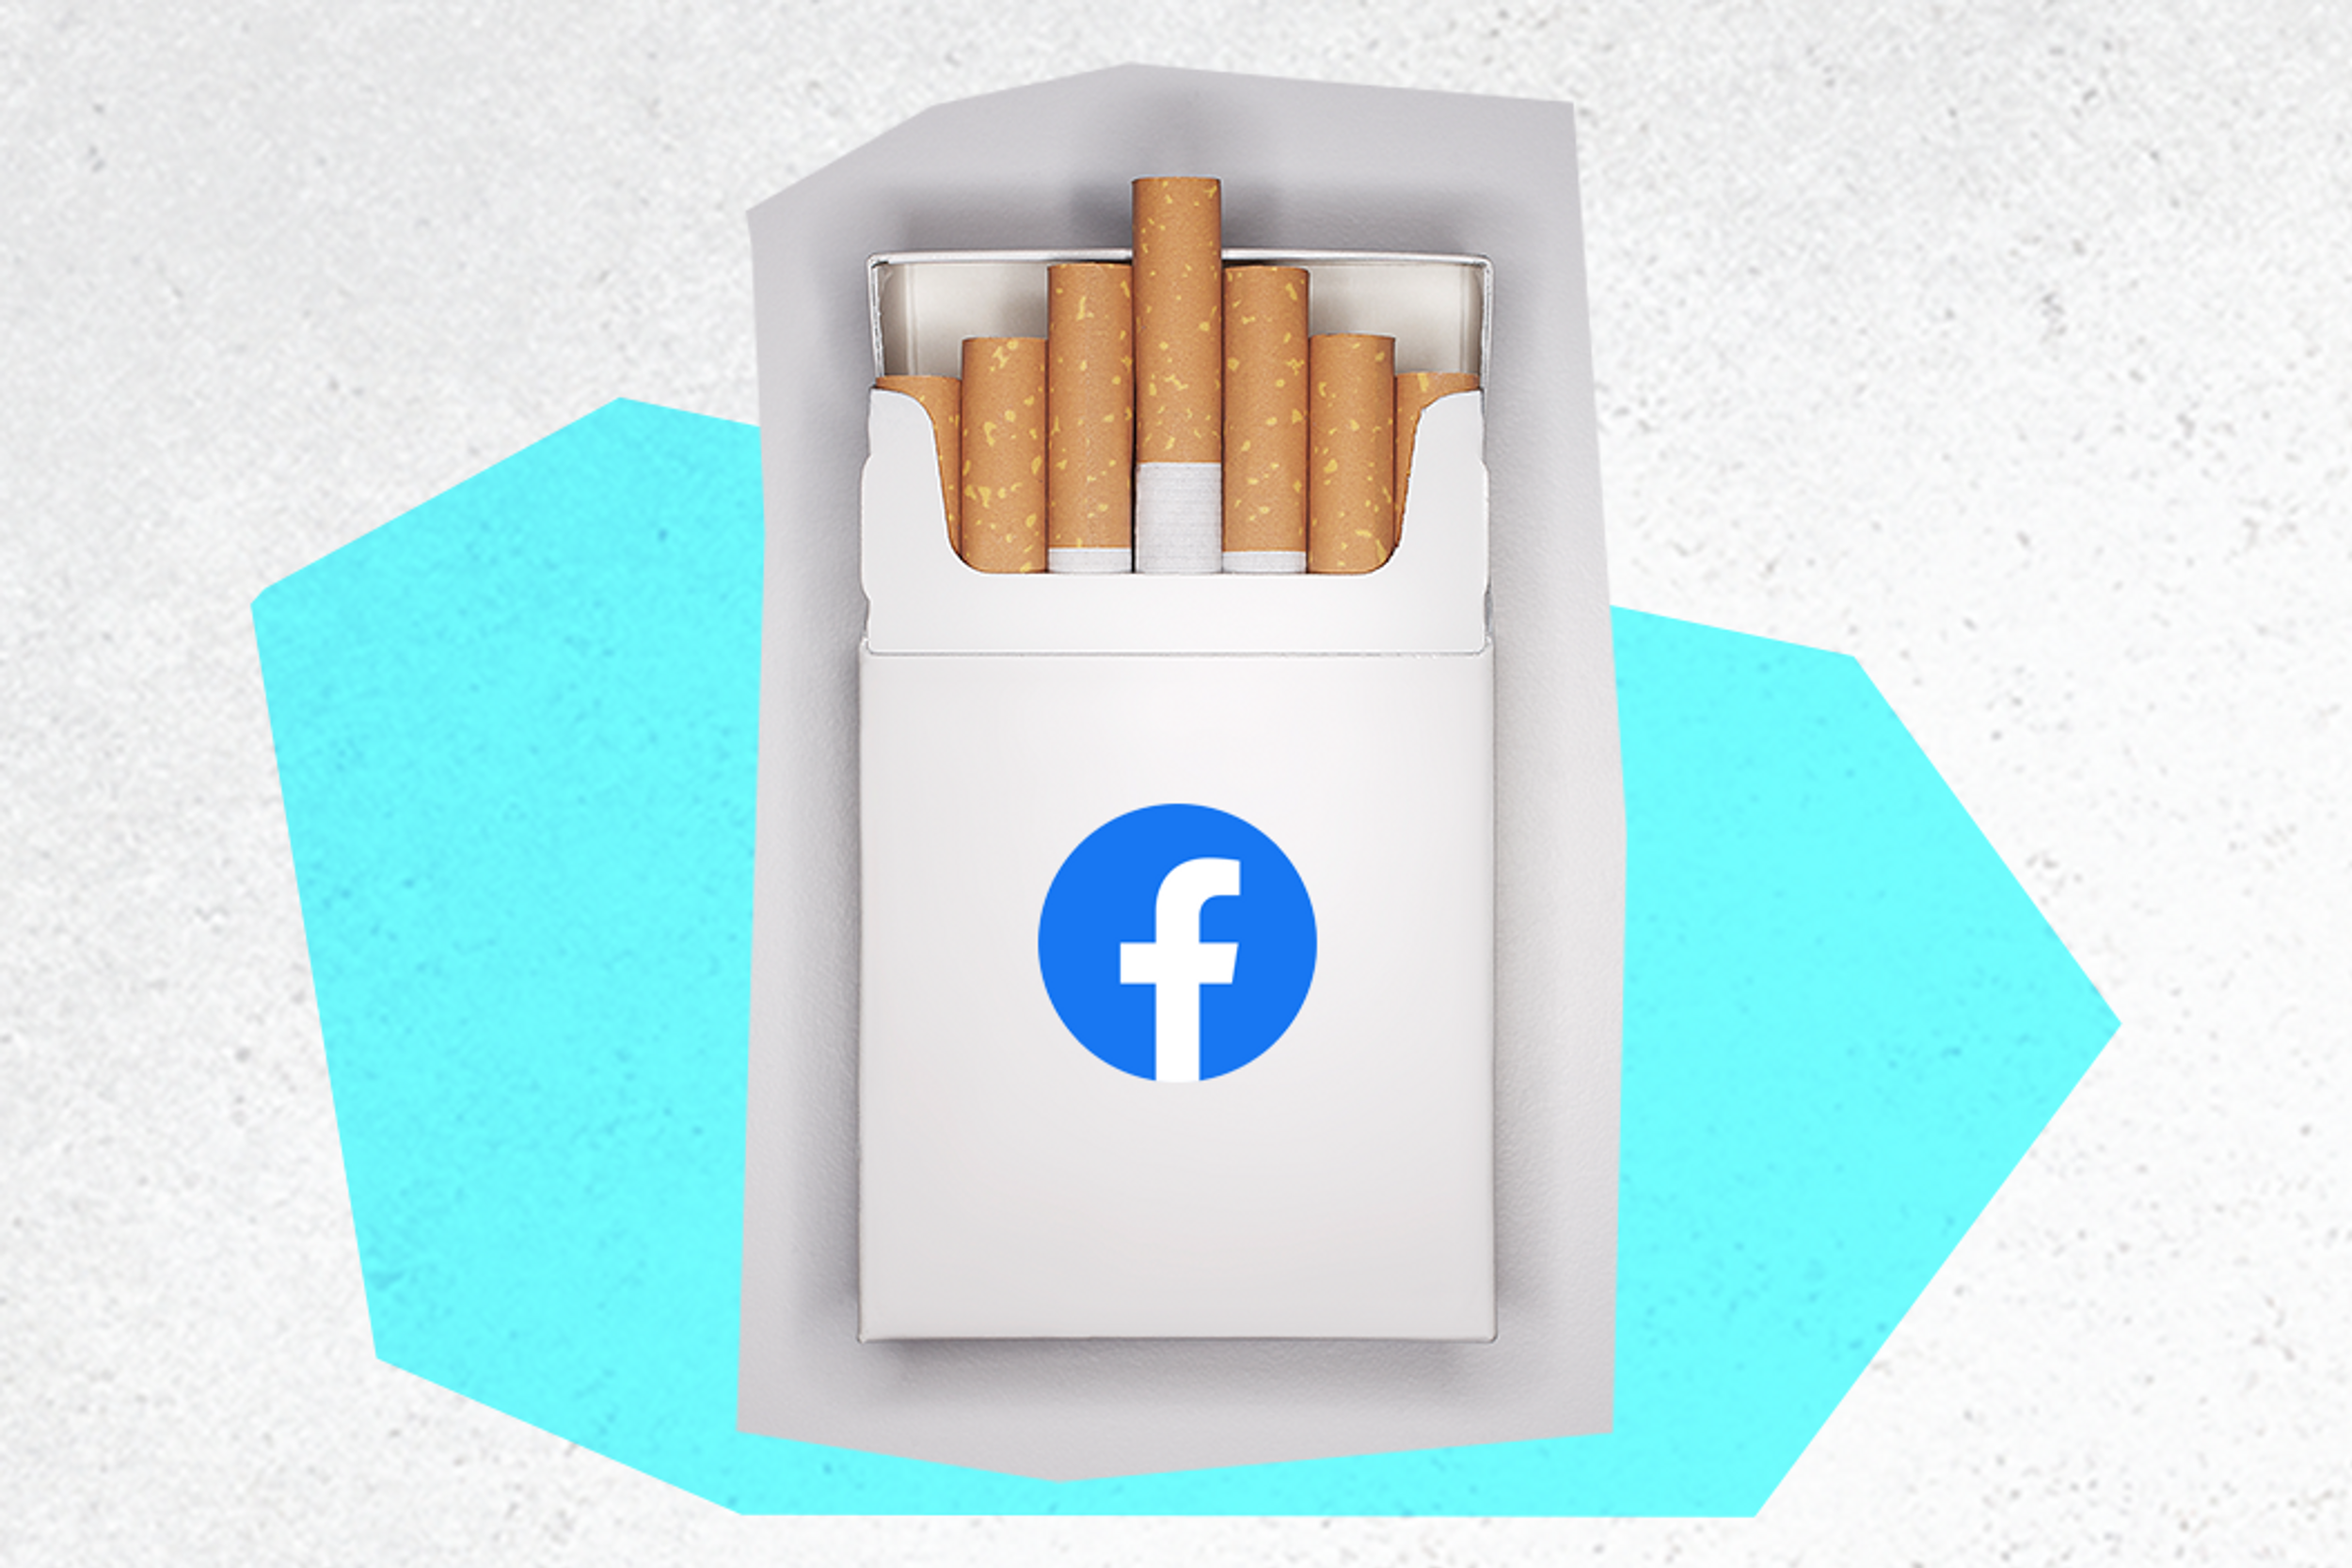 Is Facebook like a car or a cigarette?